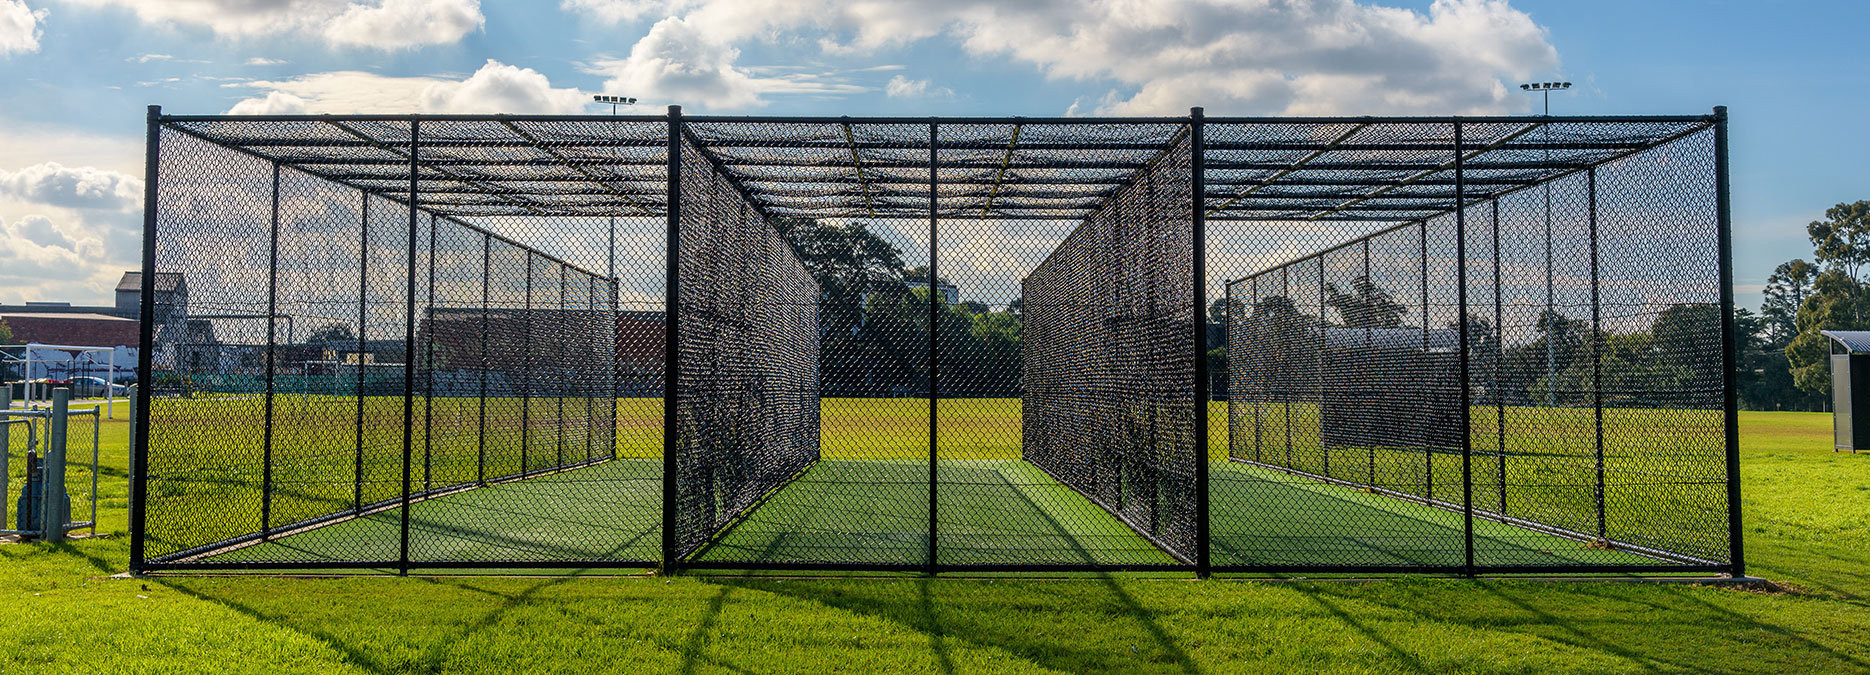 Pros And Cons Of Batting Cages Backyard Sports